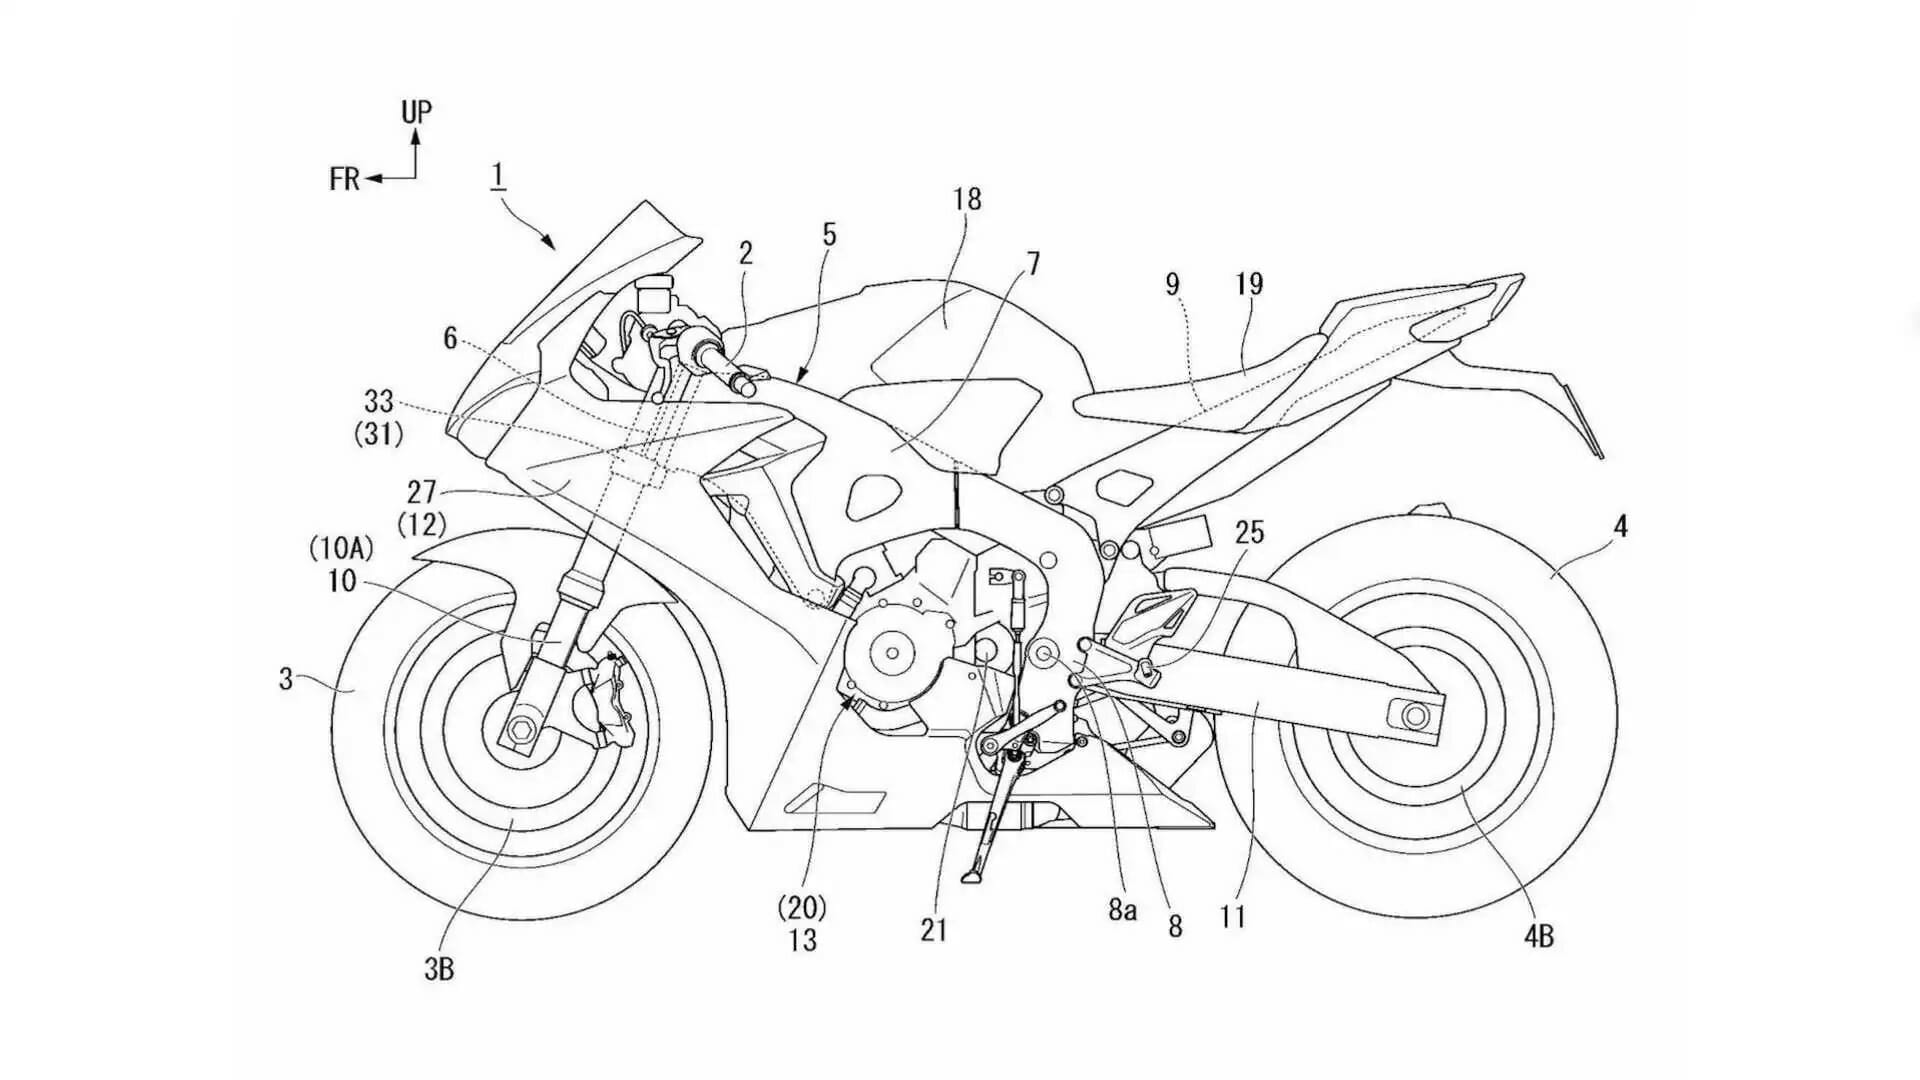 Honda patent: lane keeping assistant for motorcycles - MOTORCYCLES.NEWS